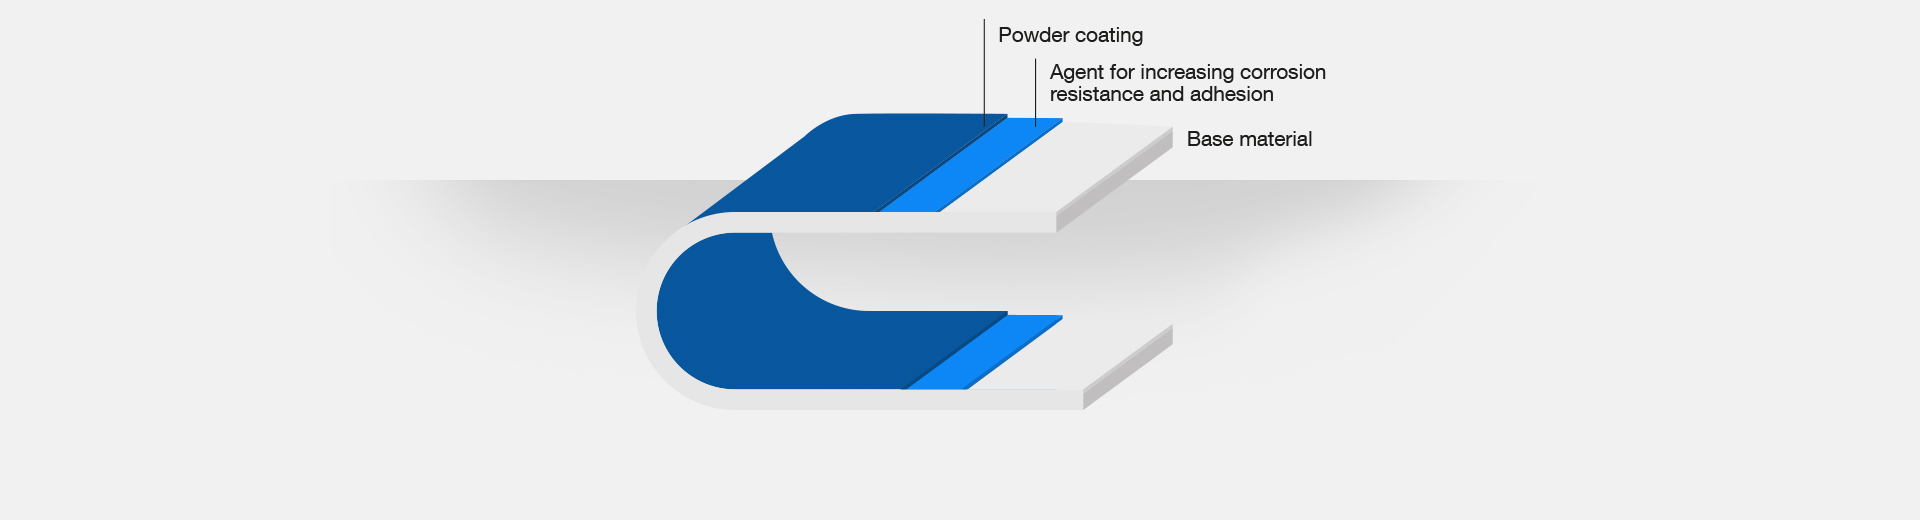 Technological procedure for powder coating